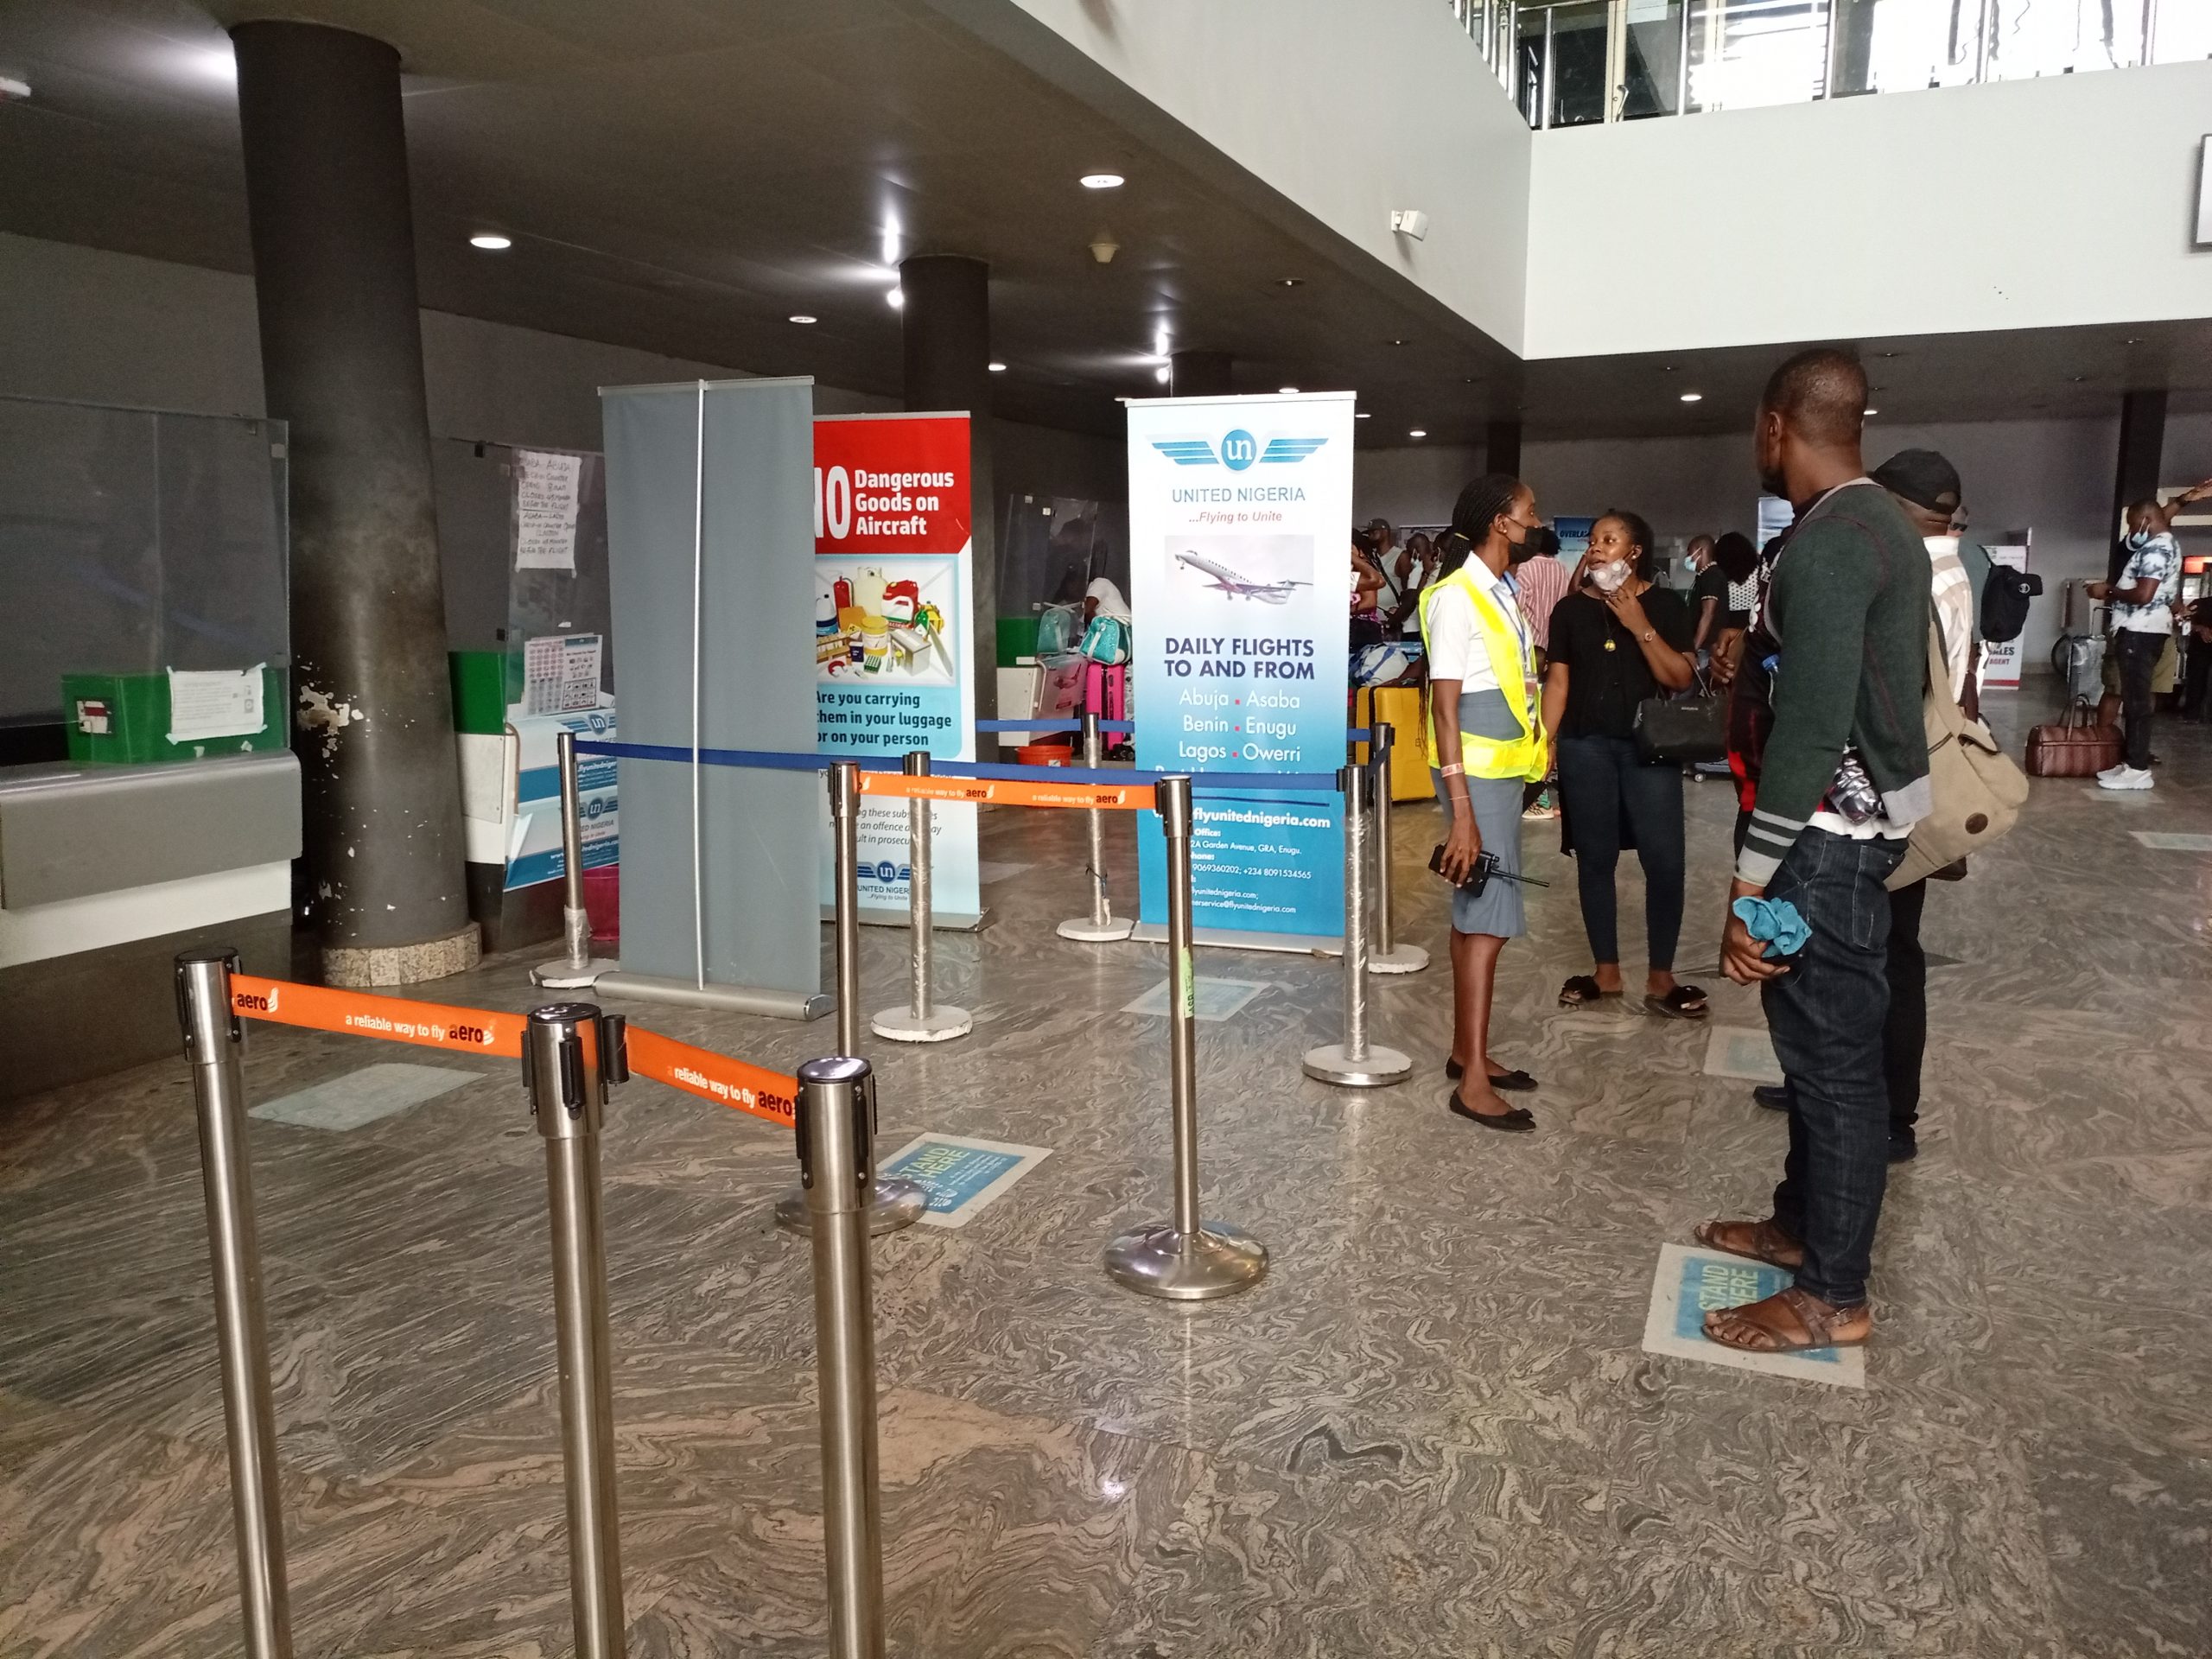 United Nigeria Airlines passengers besiege the airline's counter after being forced to disembark following battery failure of their flight to Lagos from Asaba Airport on June 28, 2021. | The Trent Photo